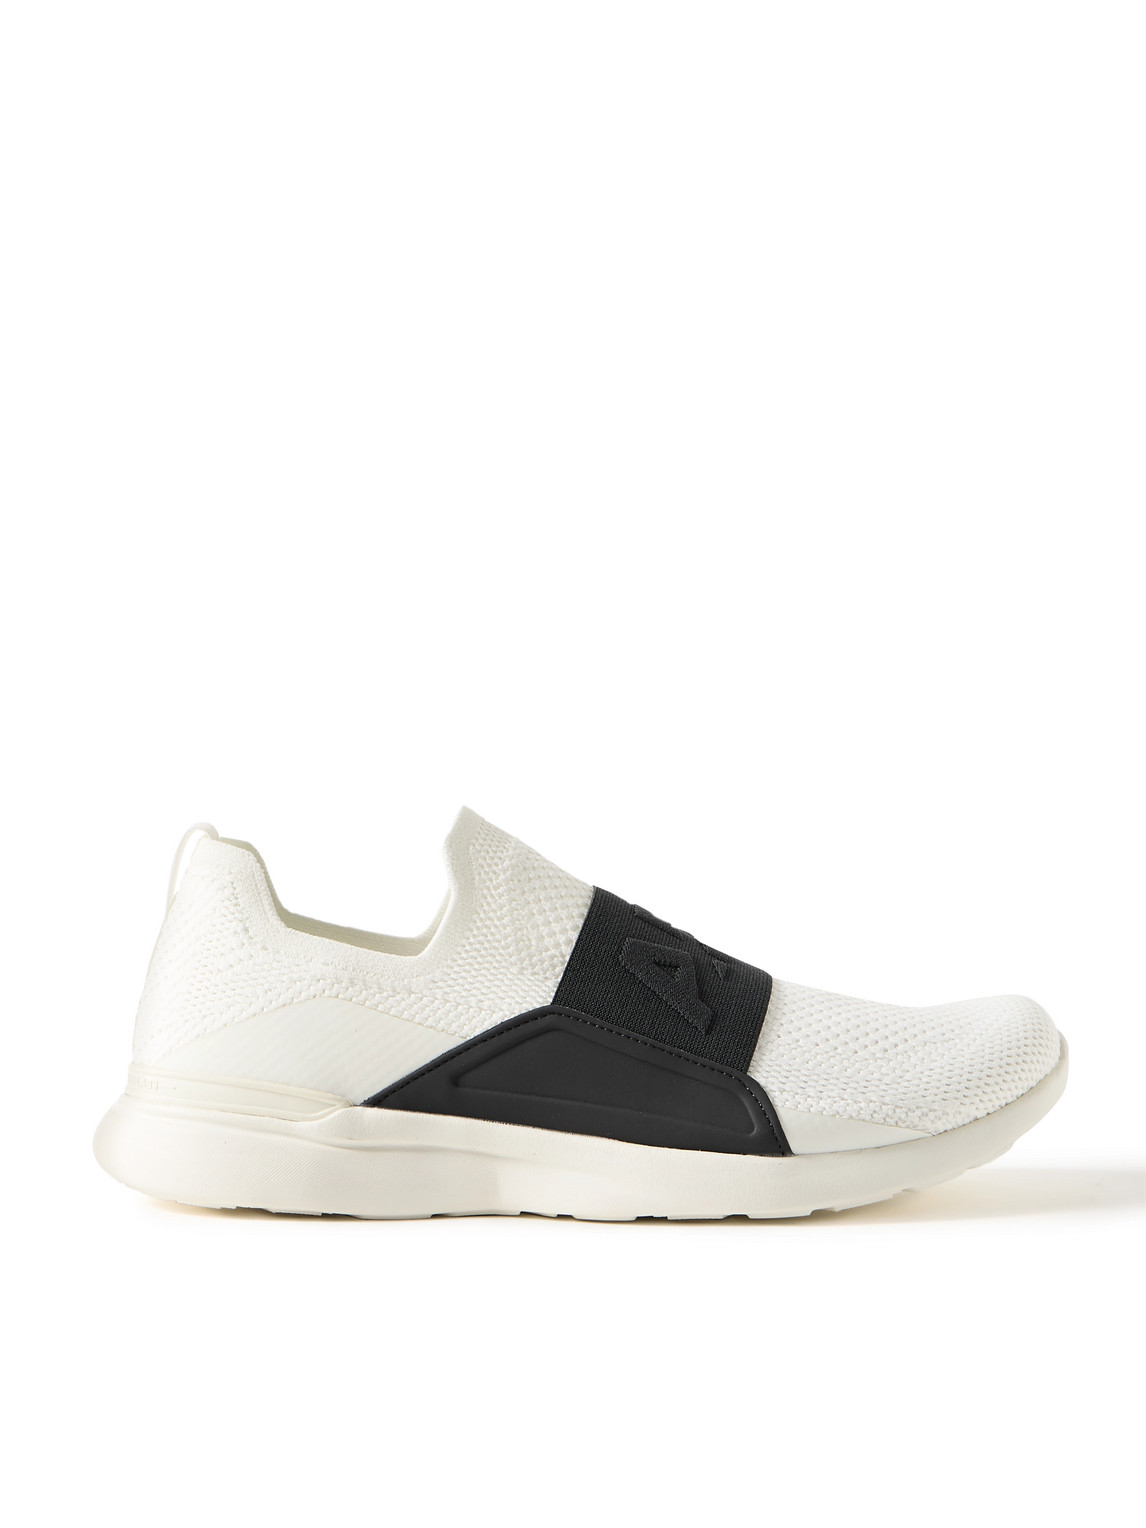 Apl Athletic Propulsion Labs Techloom Bliss Slip-on Trainers In White